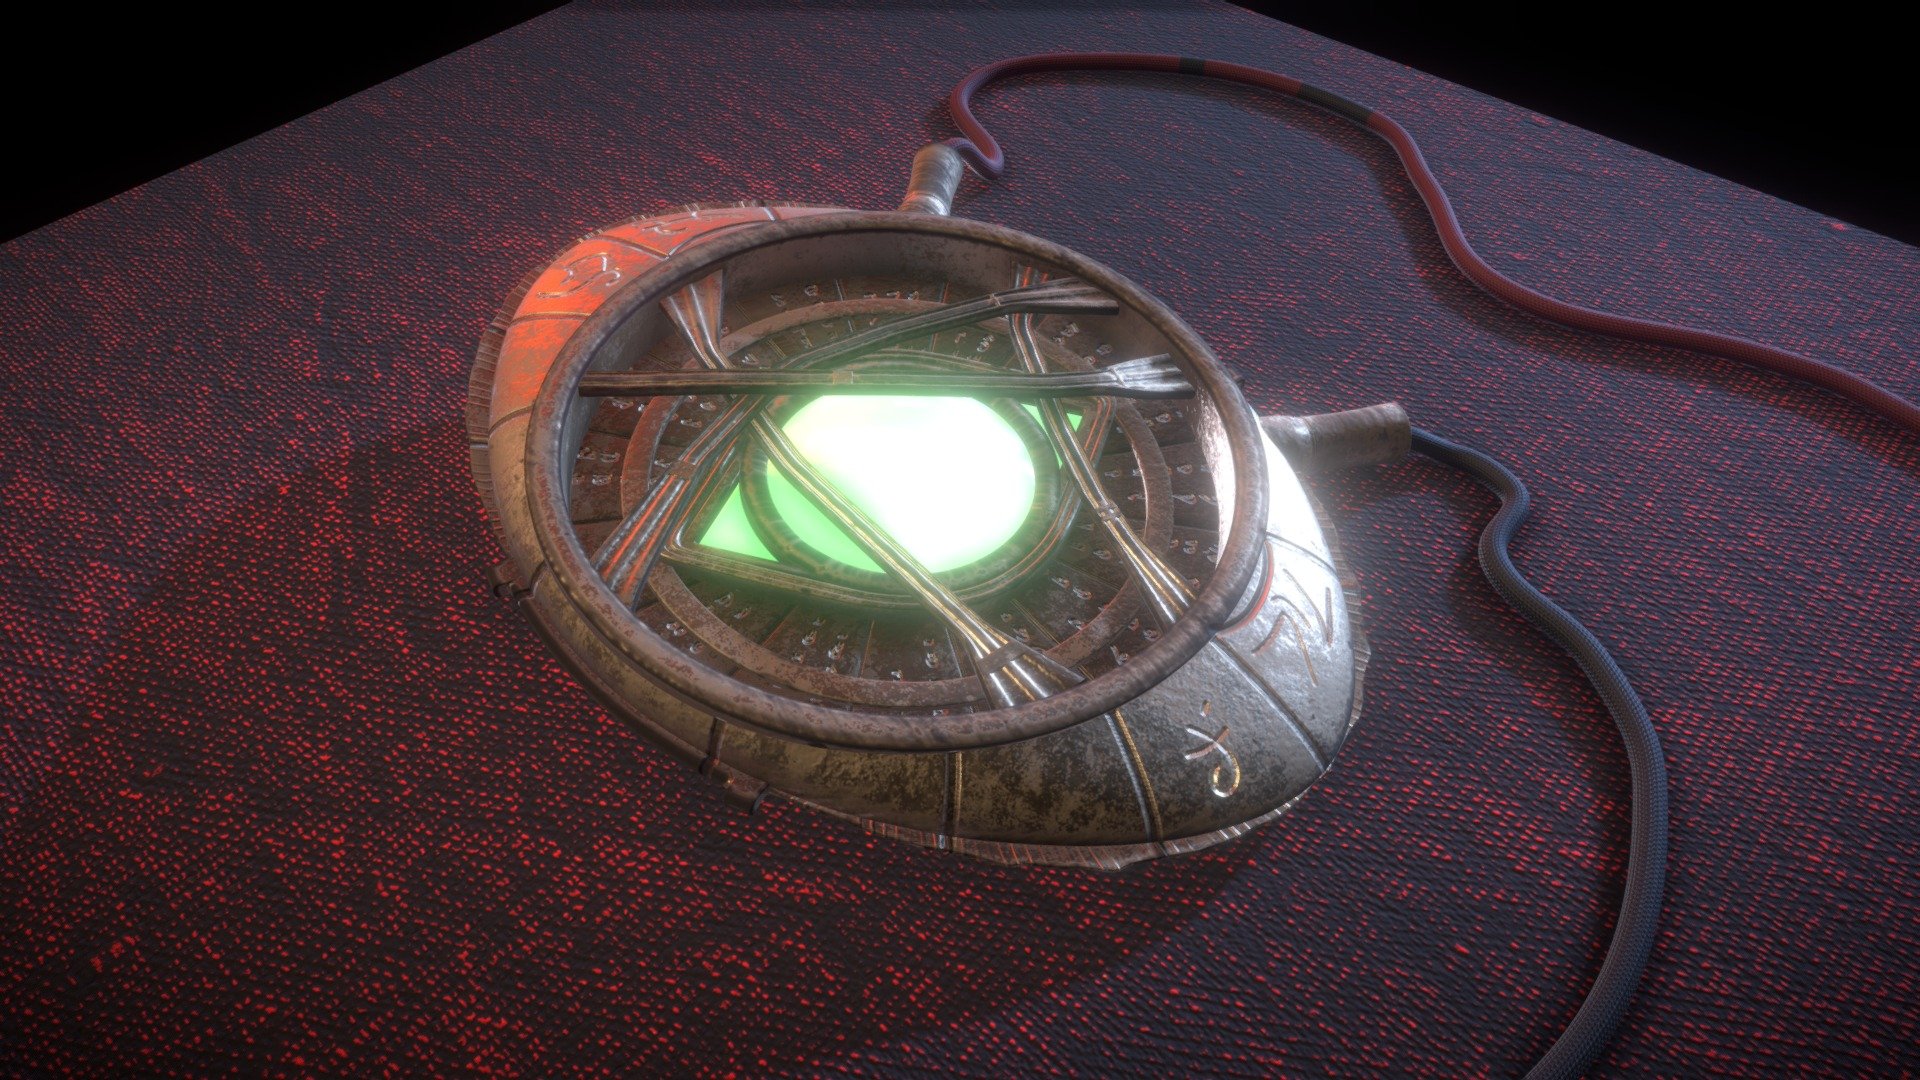 The Eye of Agamotto as worn by Dr Strange in the Marvel movie series.

Made in Blender. Textures exported with SimpleBake - The Eye of Agamotto - Download Free 3D model by HaughtyGrayAlien 3d model